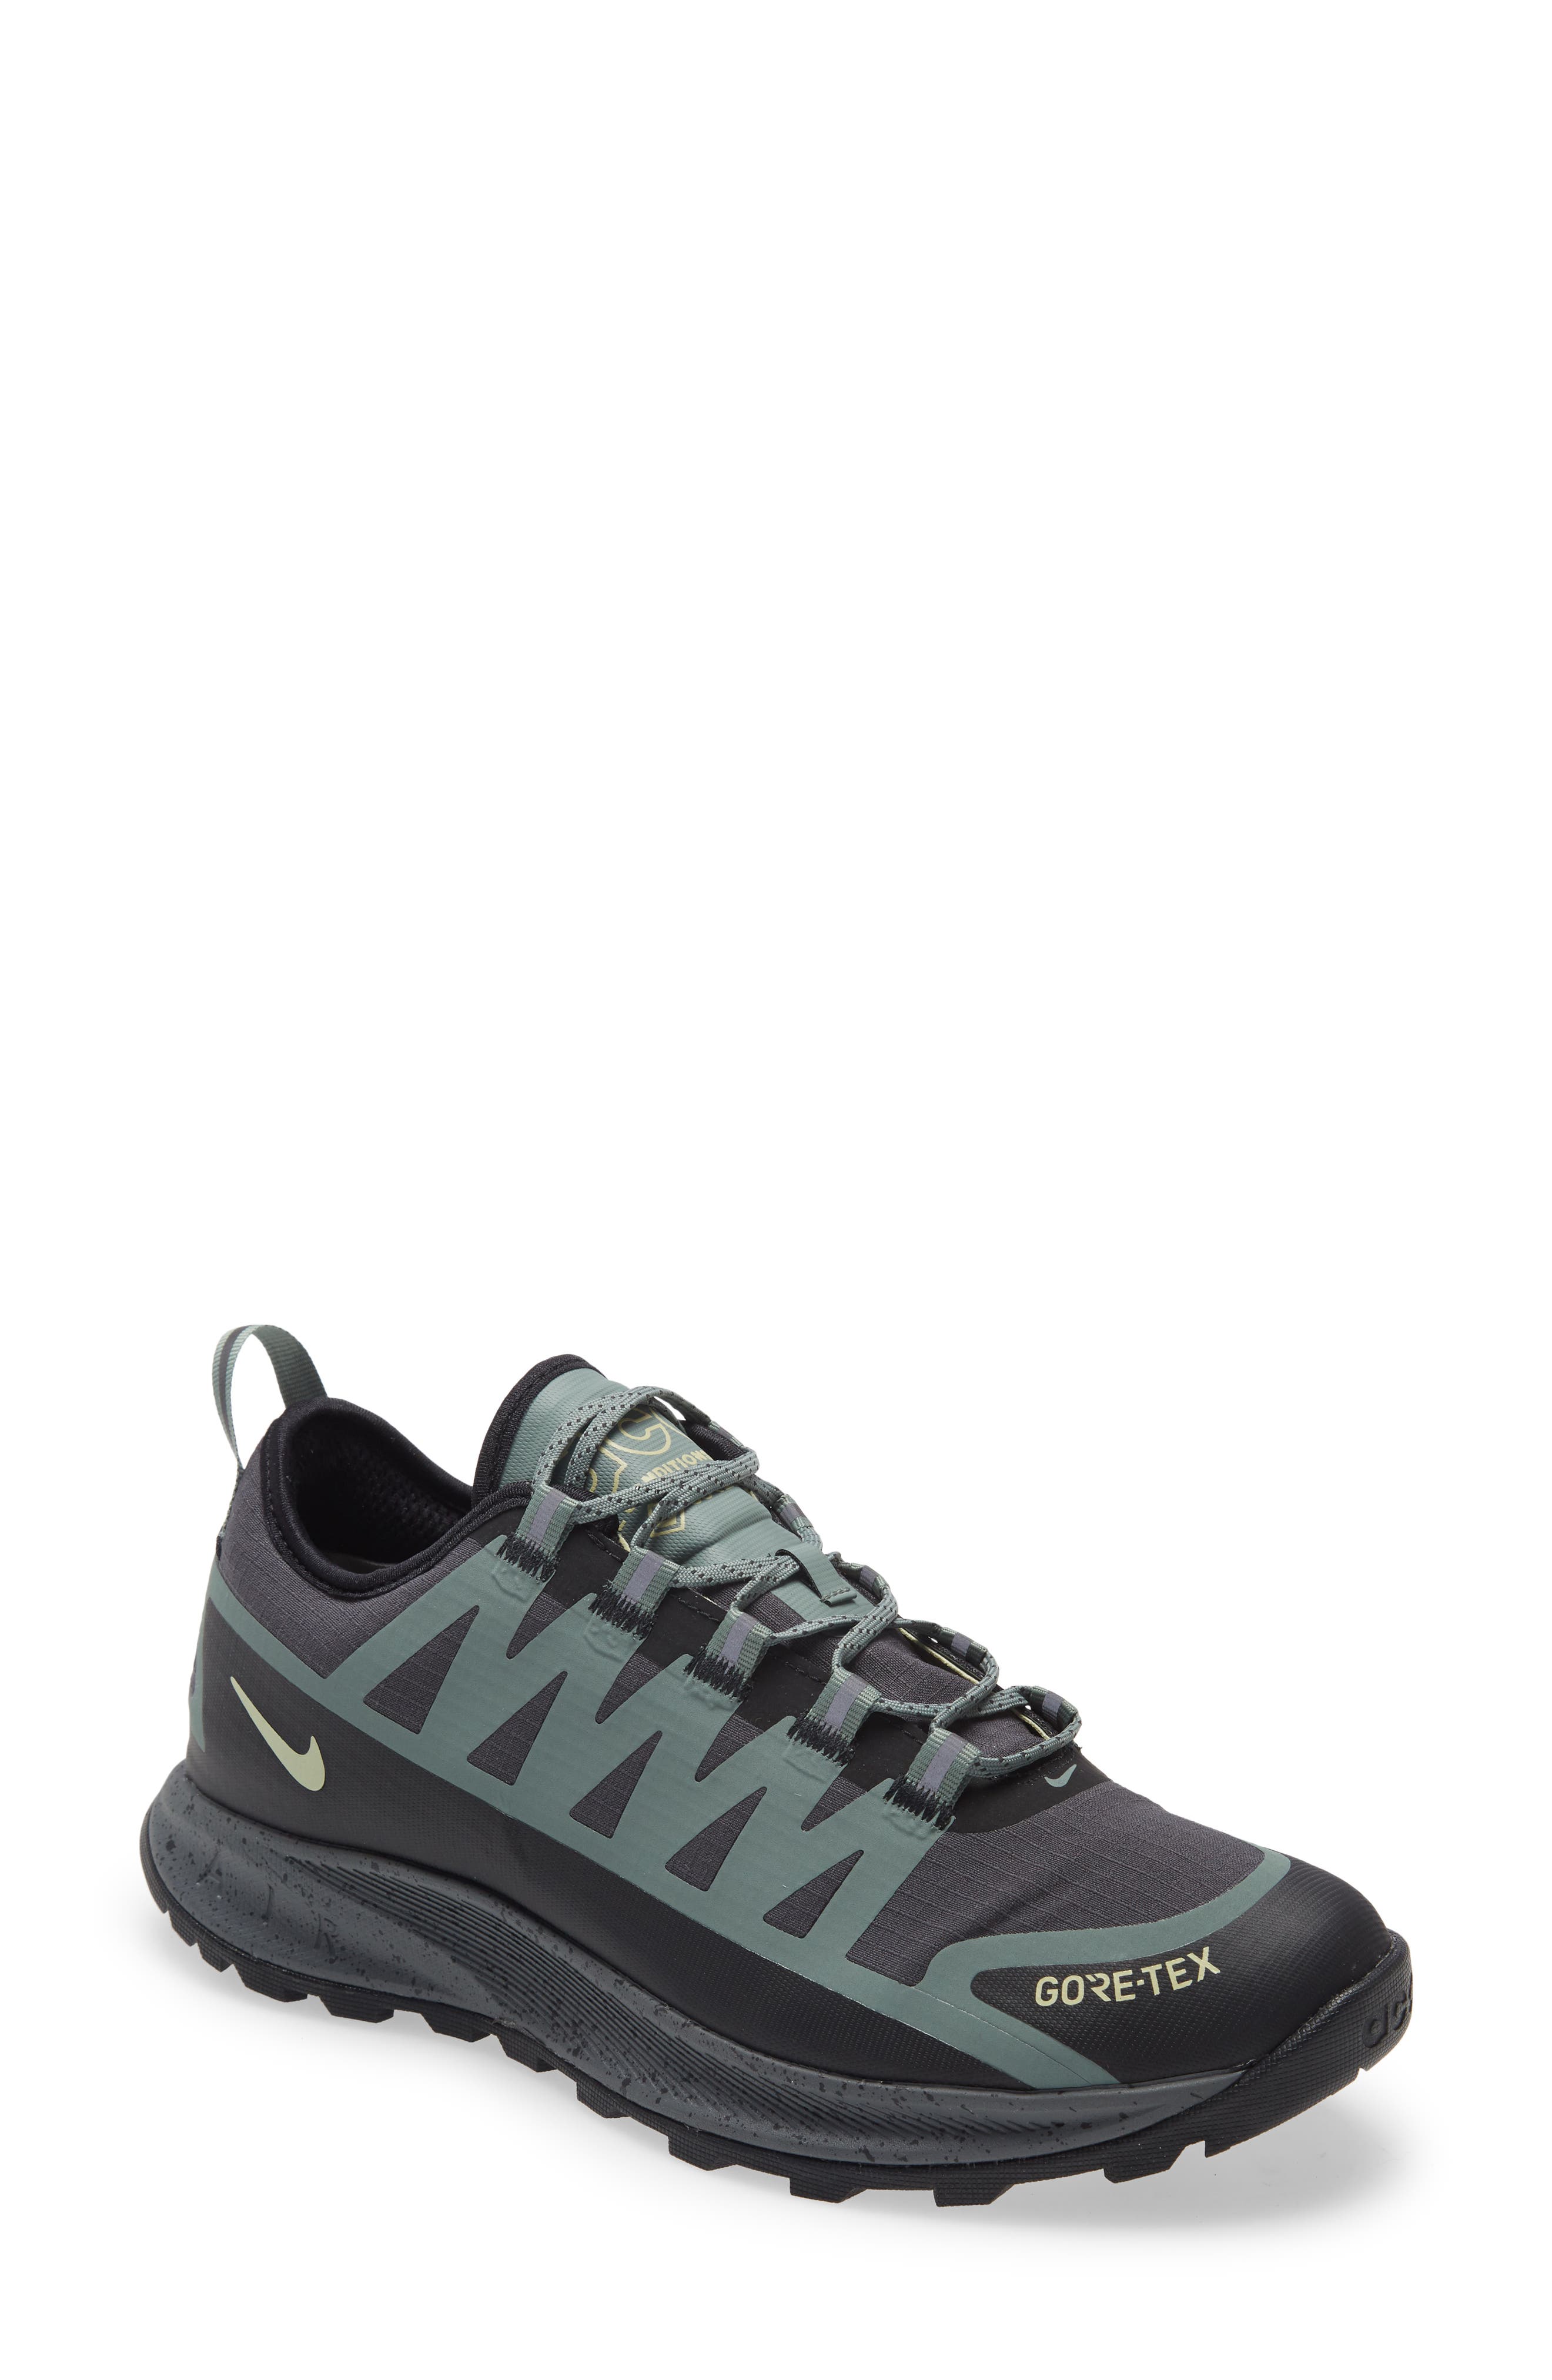 nike sneakers for hiking